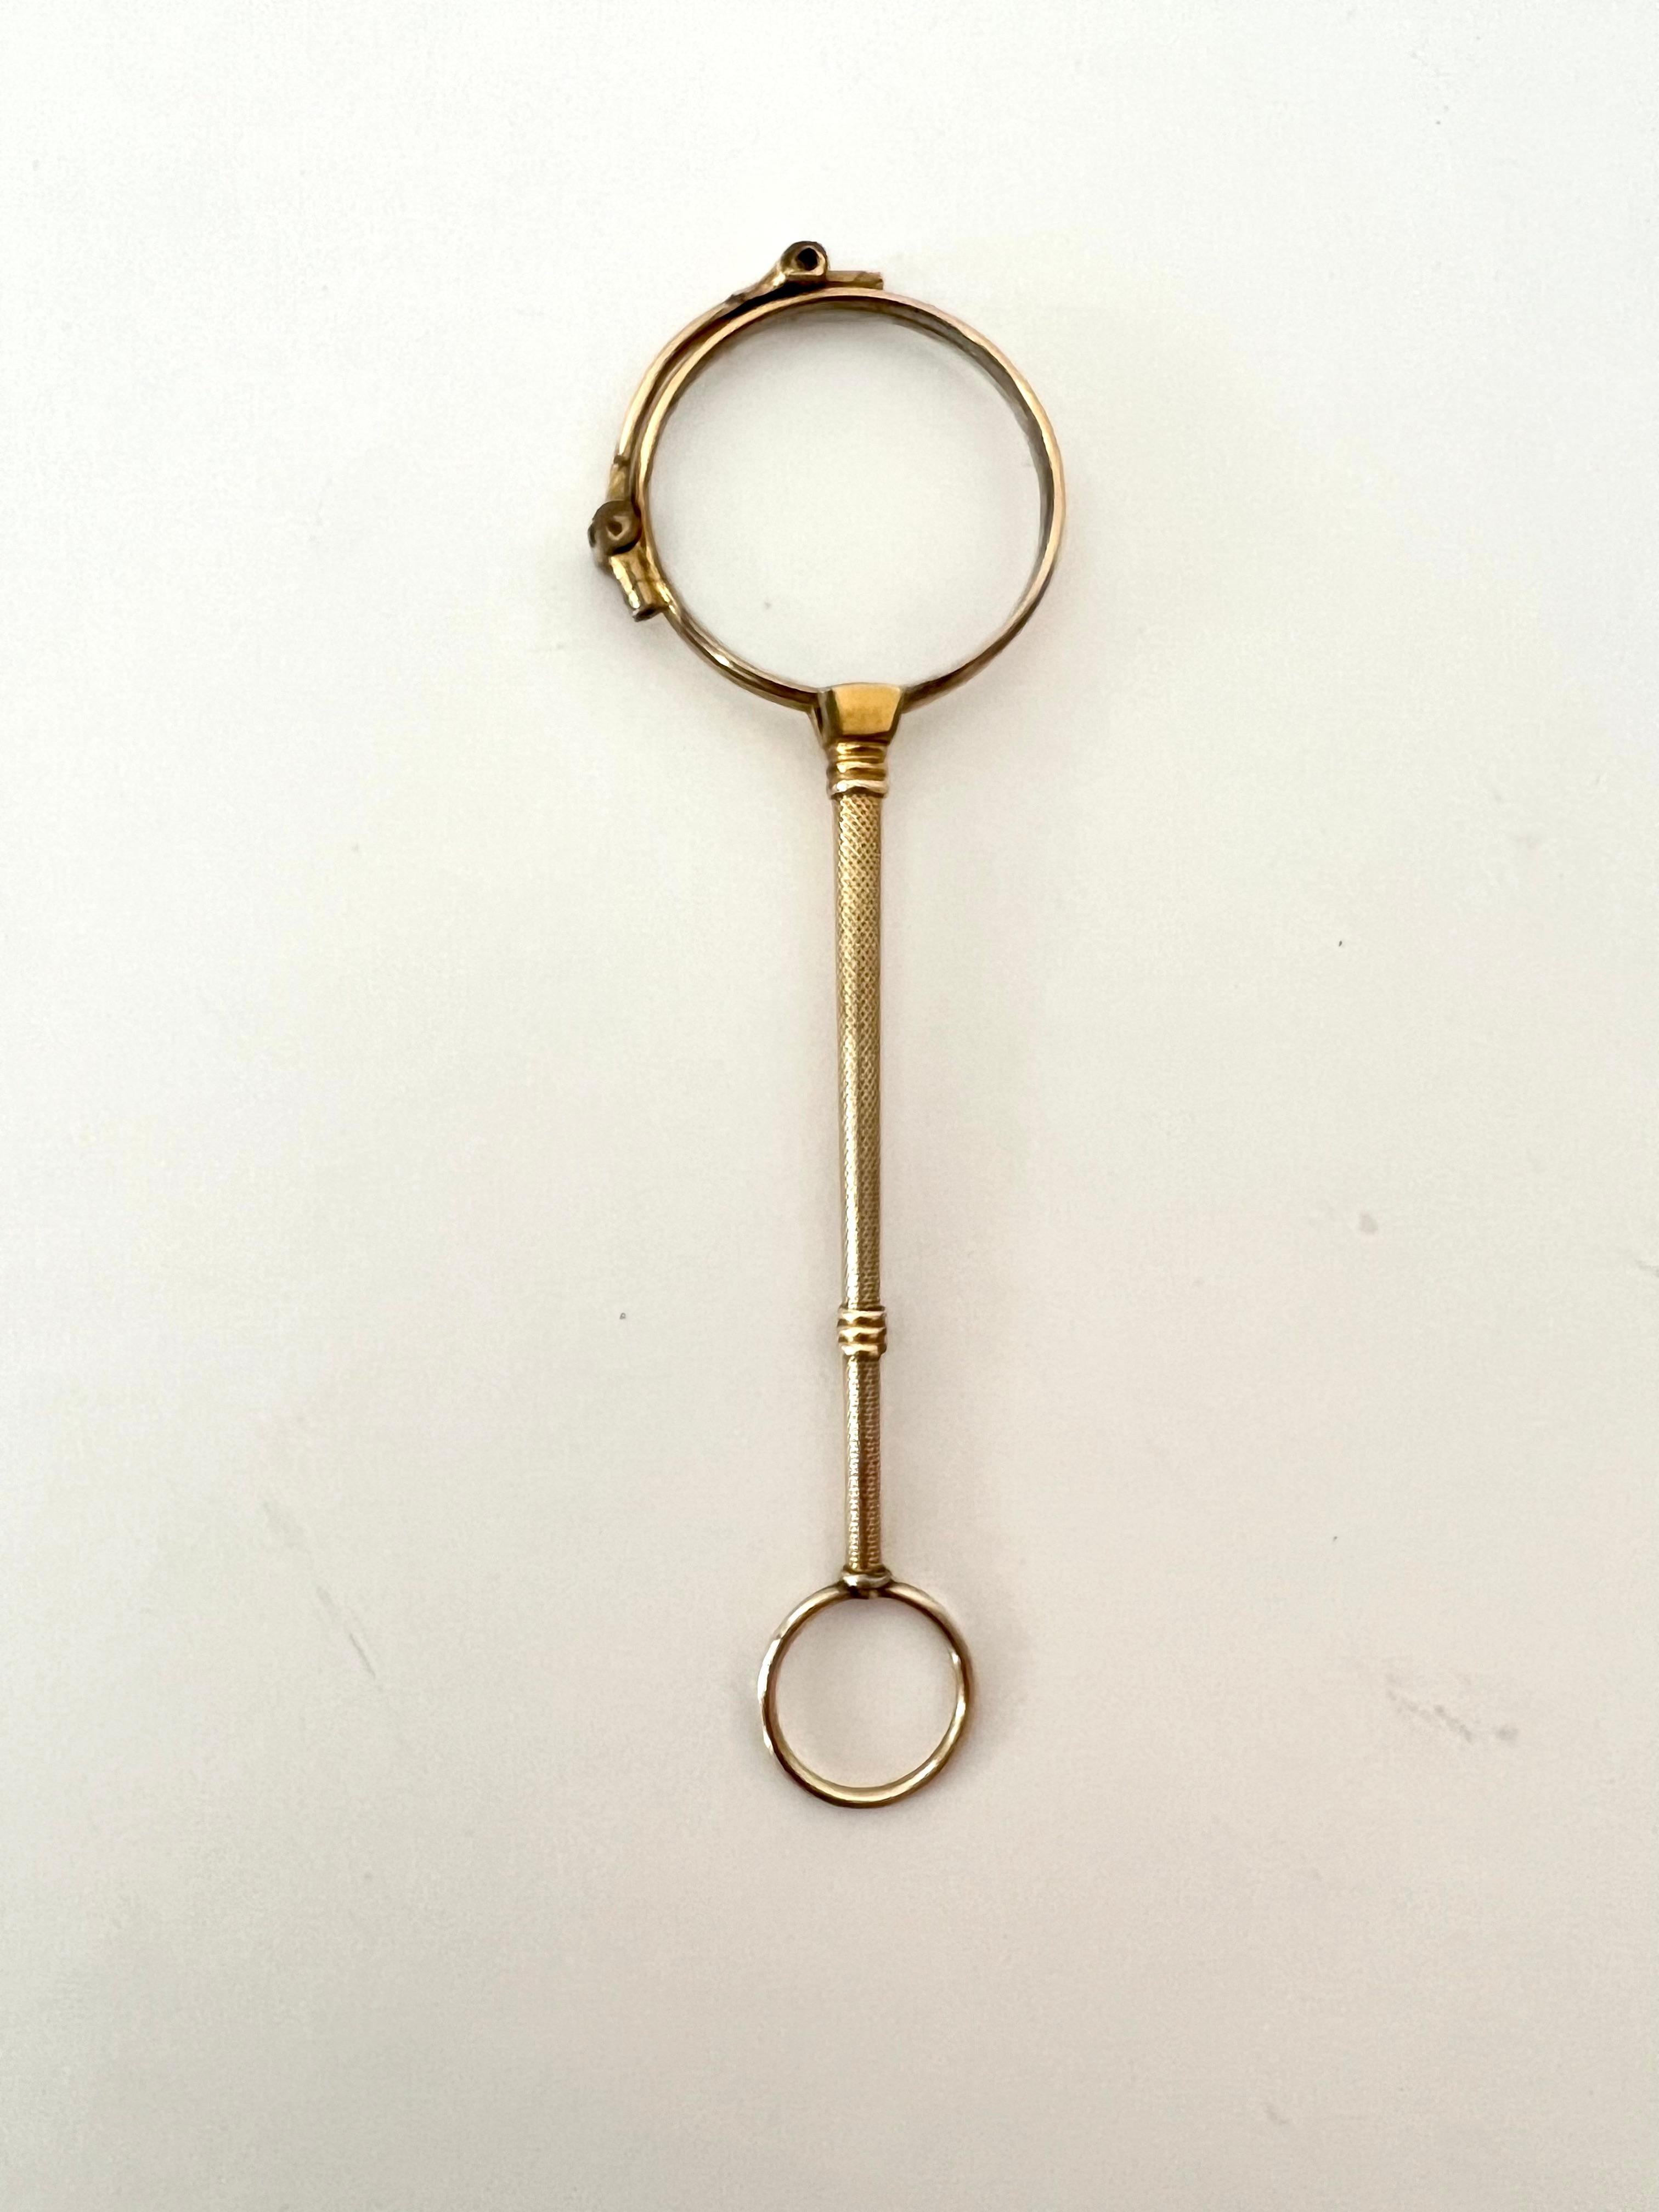 A wonderfully decorative single monocle or magnifying glass that easily opens to become a Lorgnette. The Piece looks great on a desk or work station or as a vintage display piece - very cleaver design and works great.

Can be added to a chain.